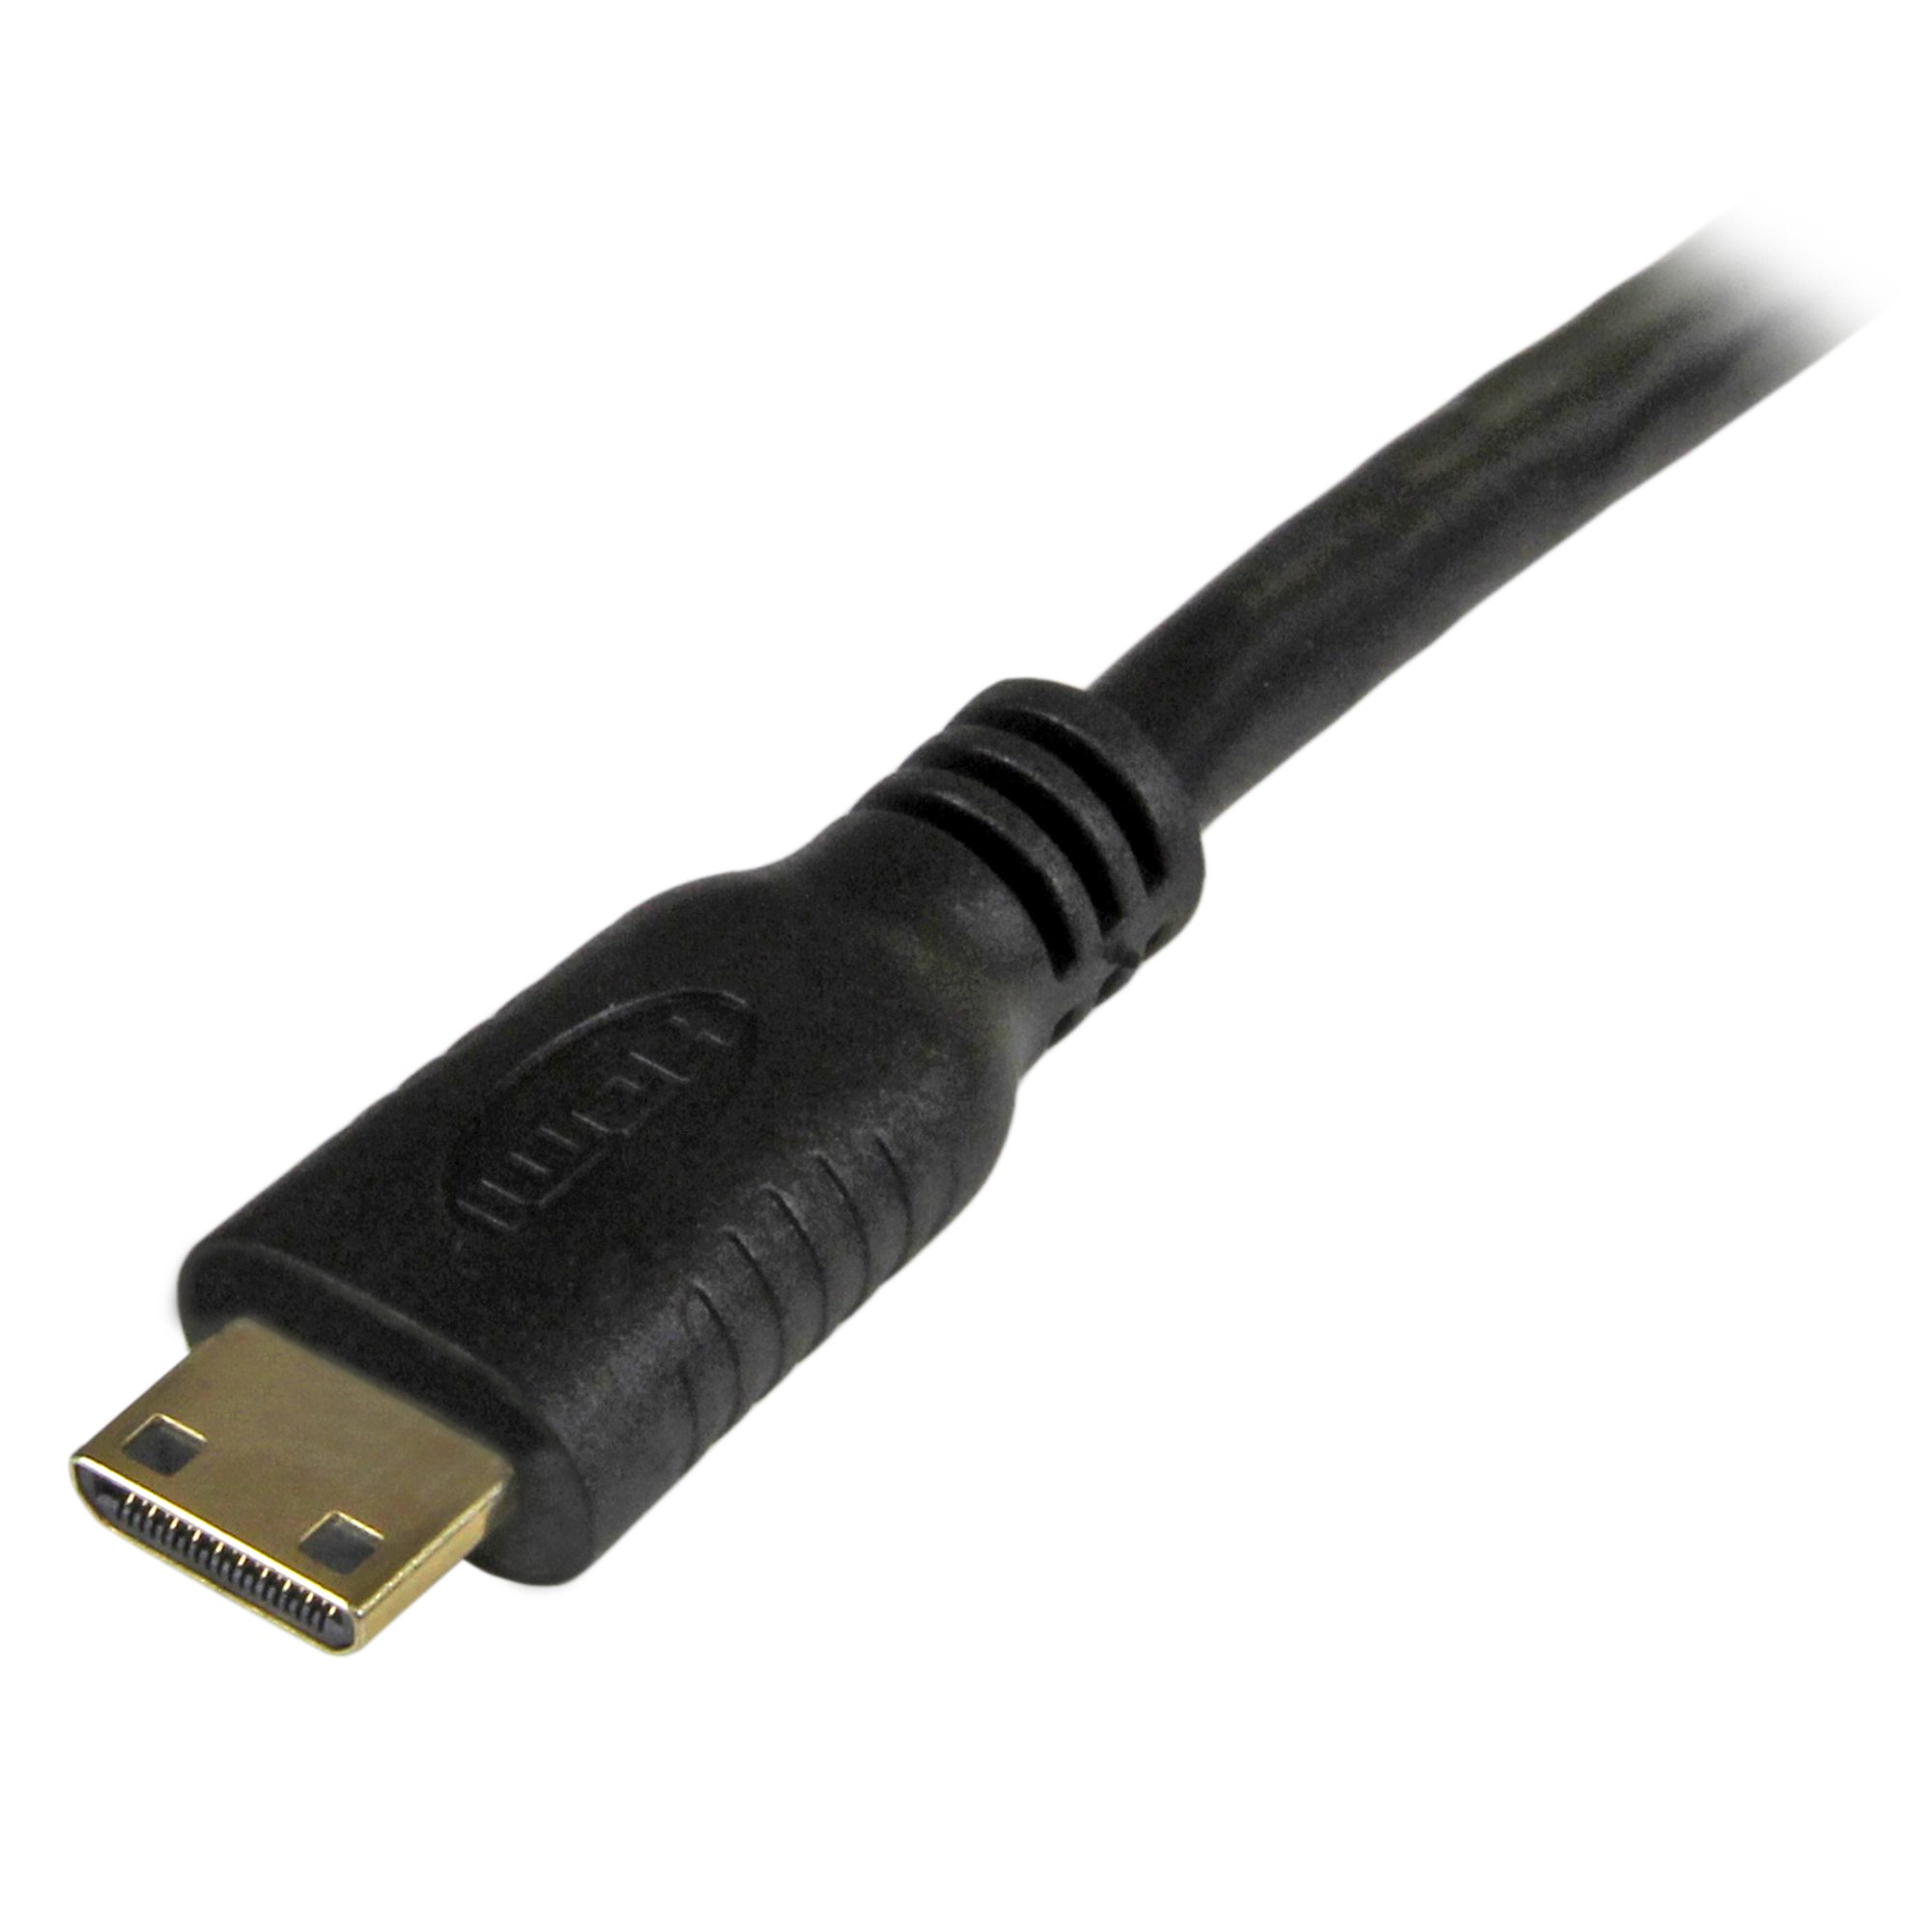 MINI HDMI TYPE C TO STANDARD HDMI A 19PIN MALE For Tablet PC Digital Camcorder 